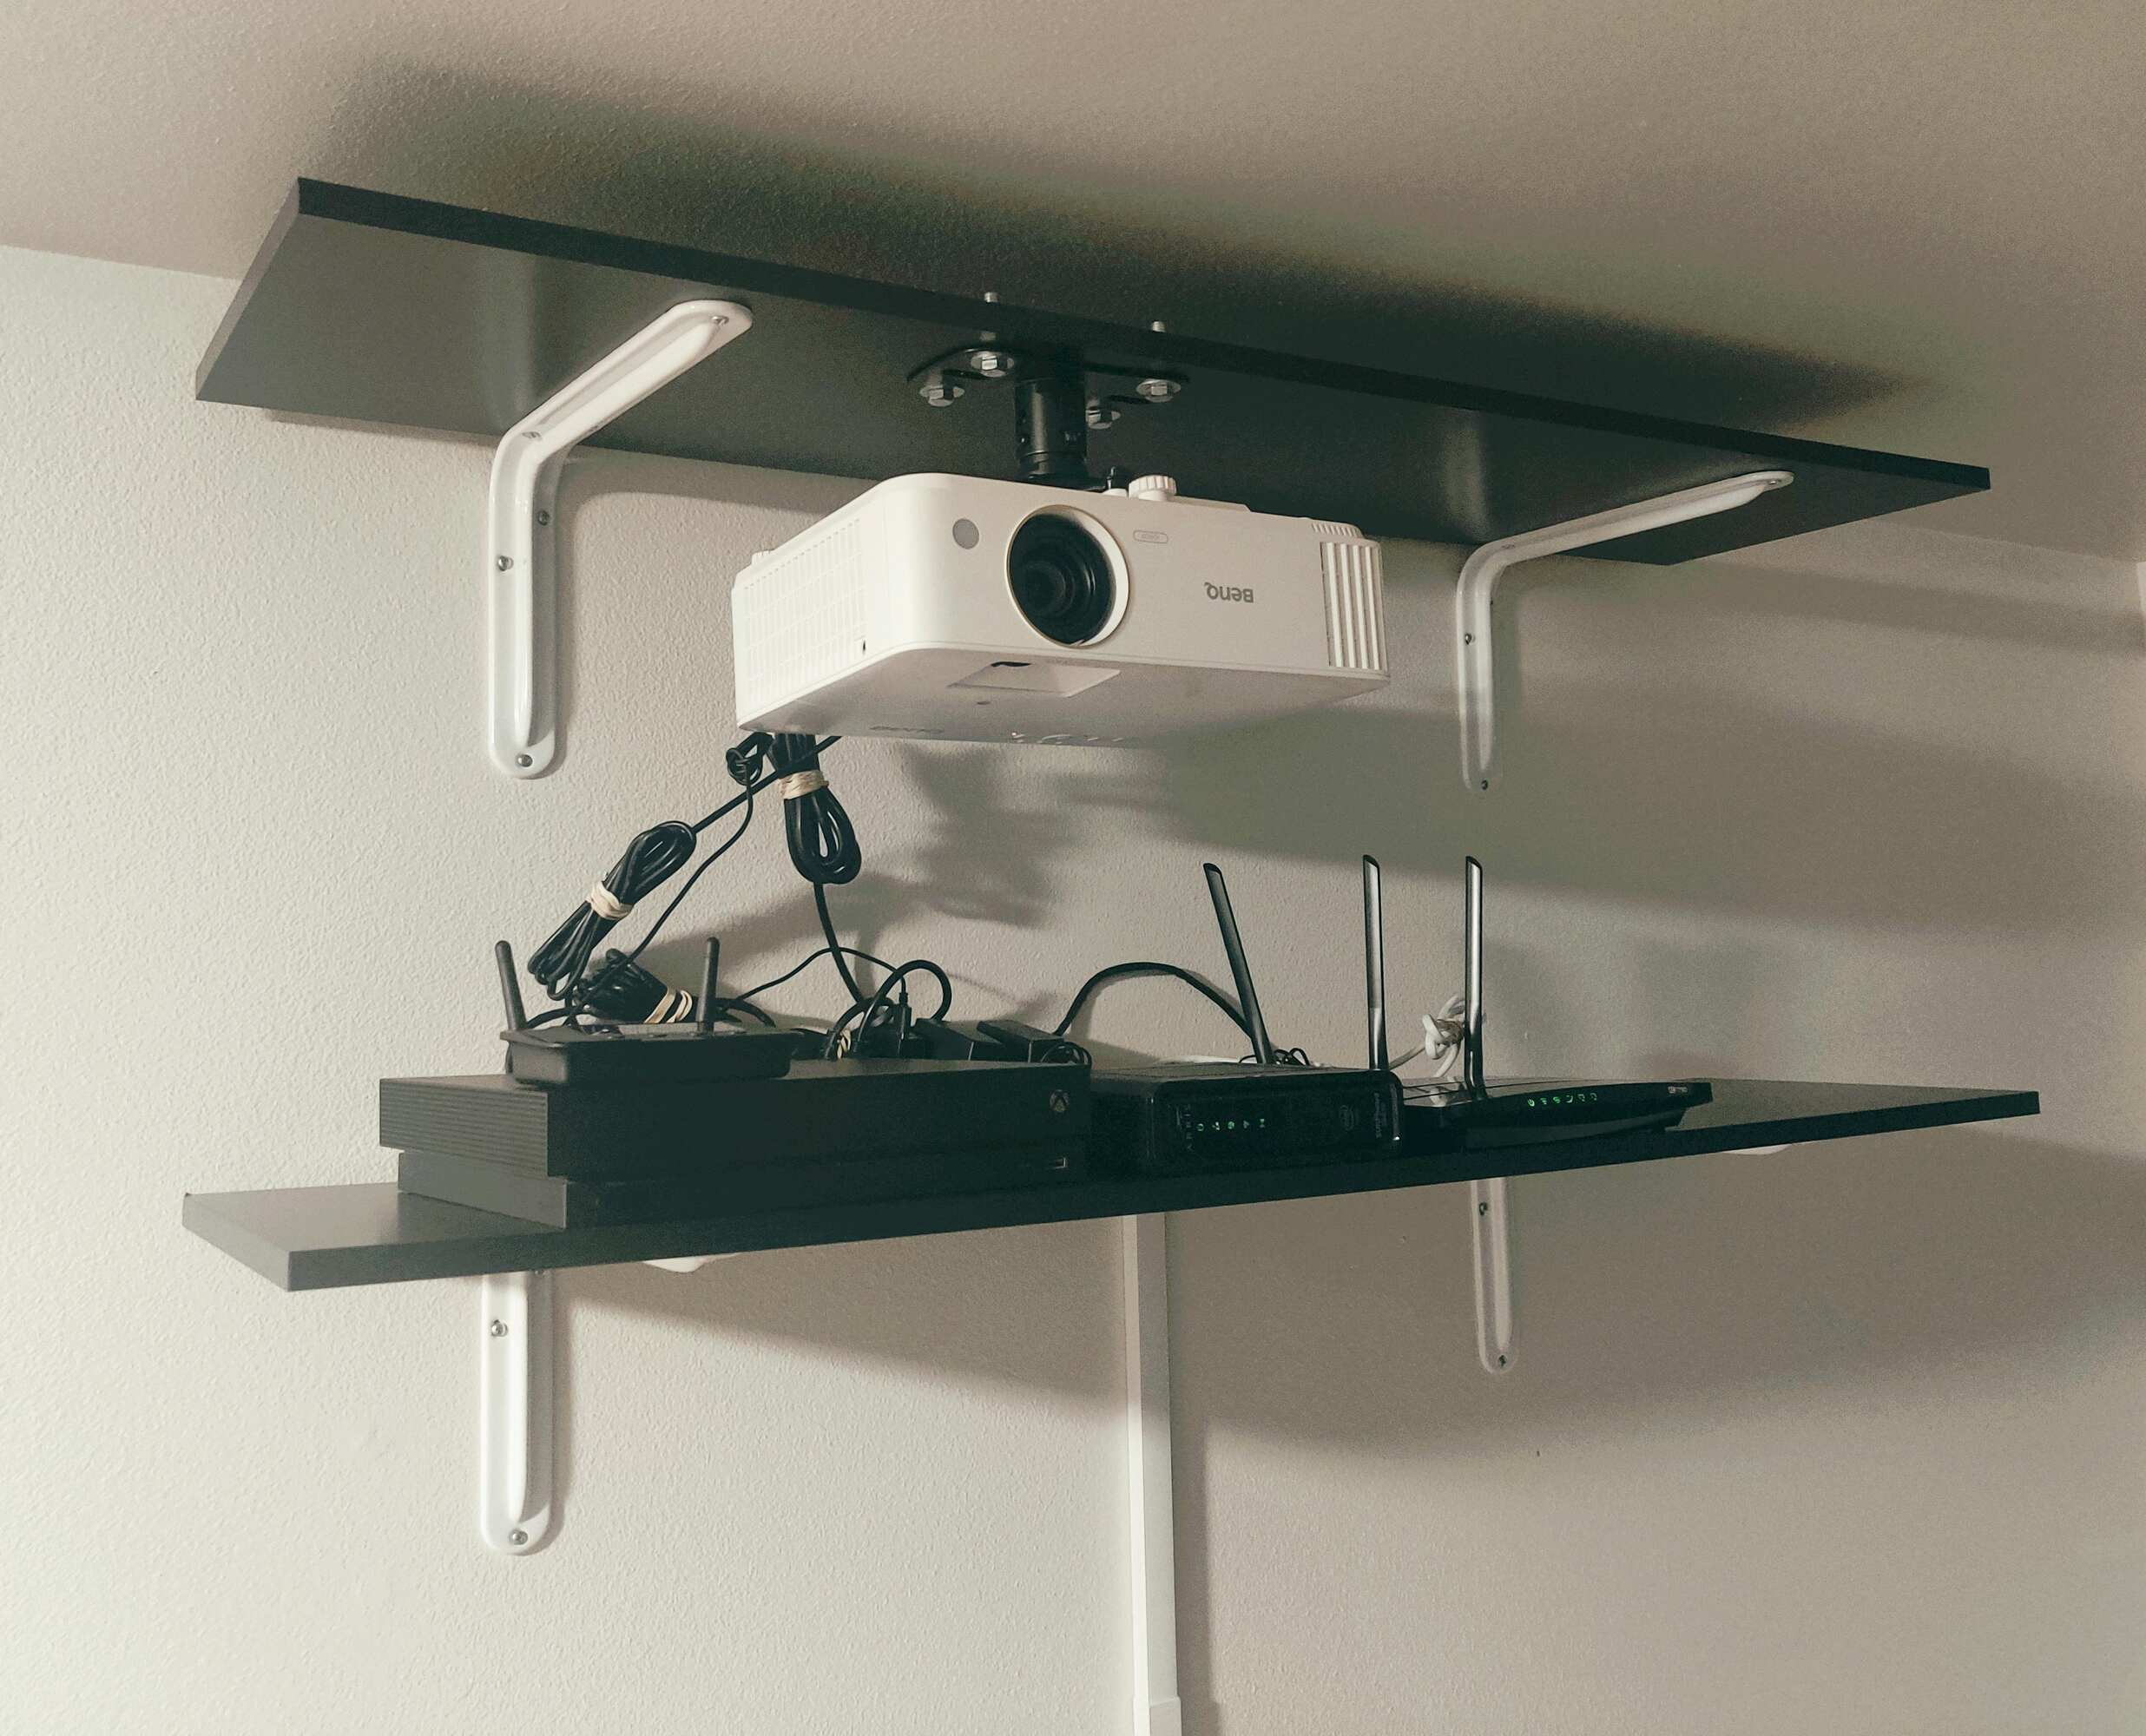 How To Mount A Projector Without Drilling